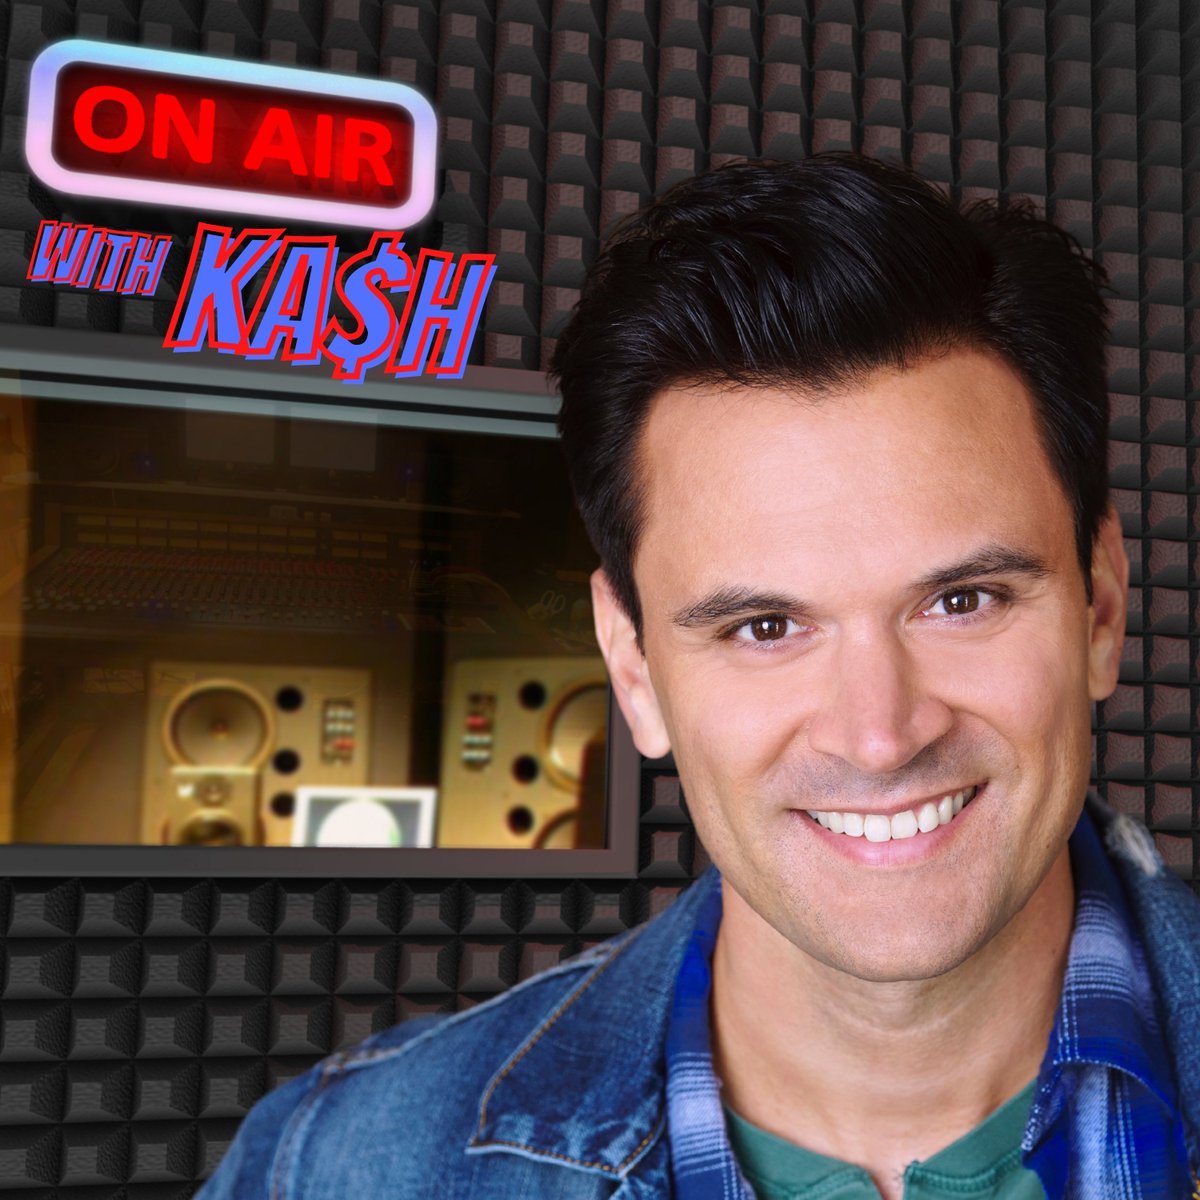 My interview with @OnAirWithKash just dropped! It was such a pleasure speaking with him!

Check it out ⬇️

youtu.be/PC0oLH30HUM

#WomenInFilm #IndieFilm #WomenInHollywood #BirthControl #FemaleDirectors #Filmmaking #Film #FilmProduction #BehindTheScenes